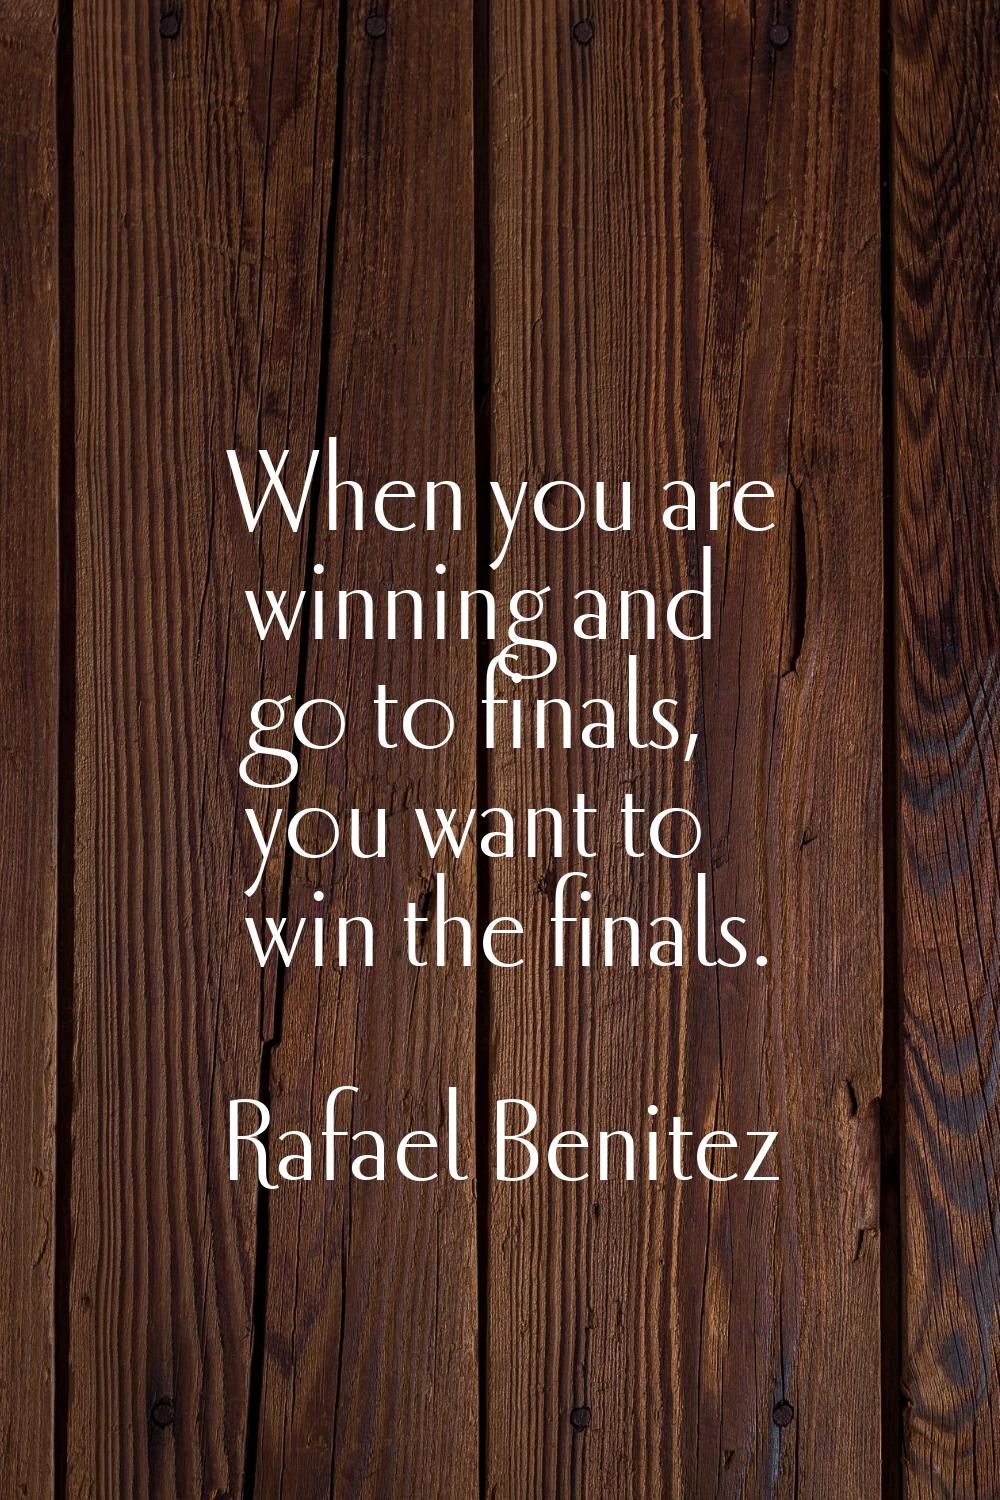 When you are winning and go to finals, you want to win the finals.